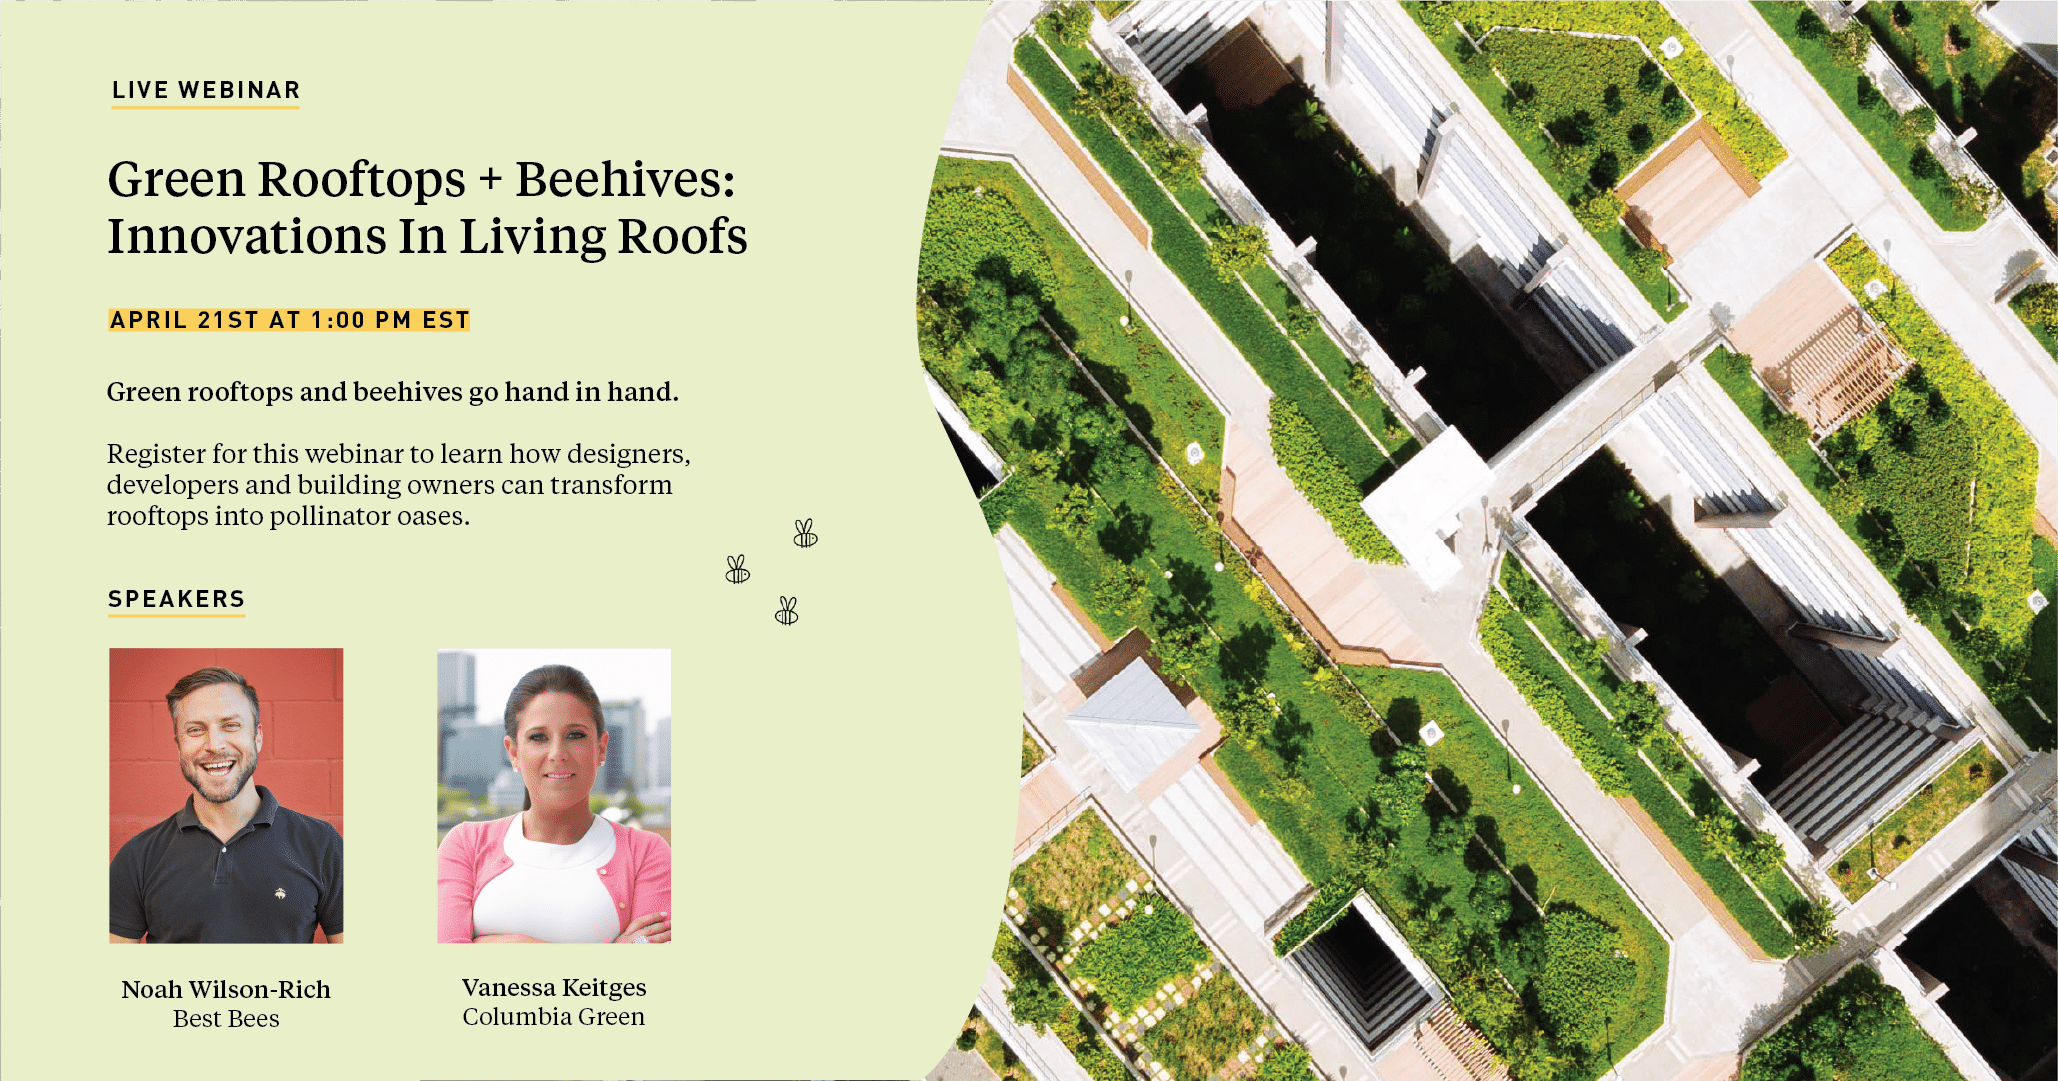 join our webinar! Green rooftops and beehives: innovations in living roofs. learn how designers, developers, and building owners can transform rooftops into pollinator oases.